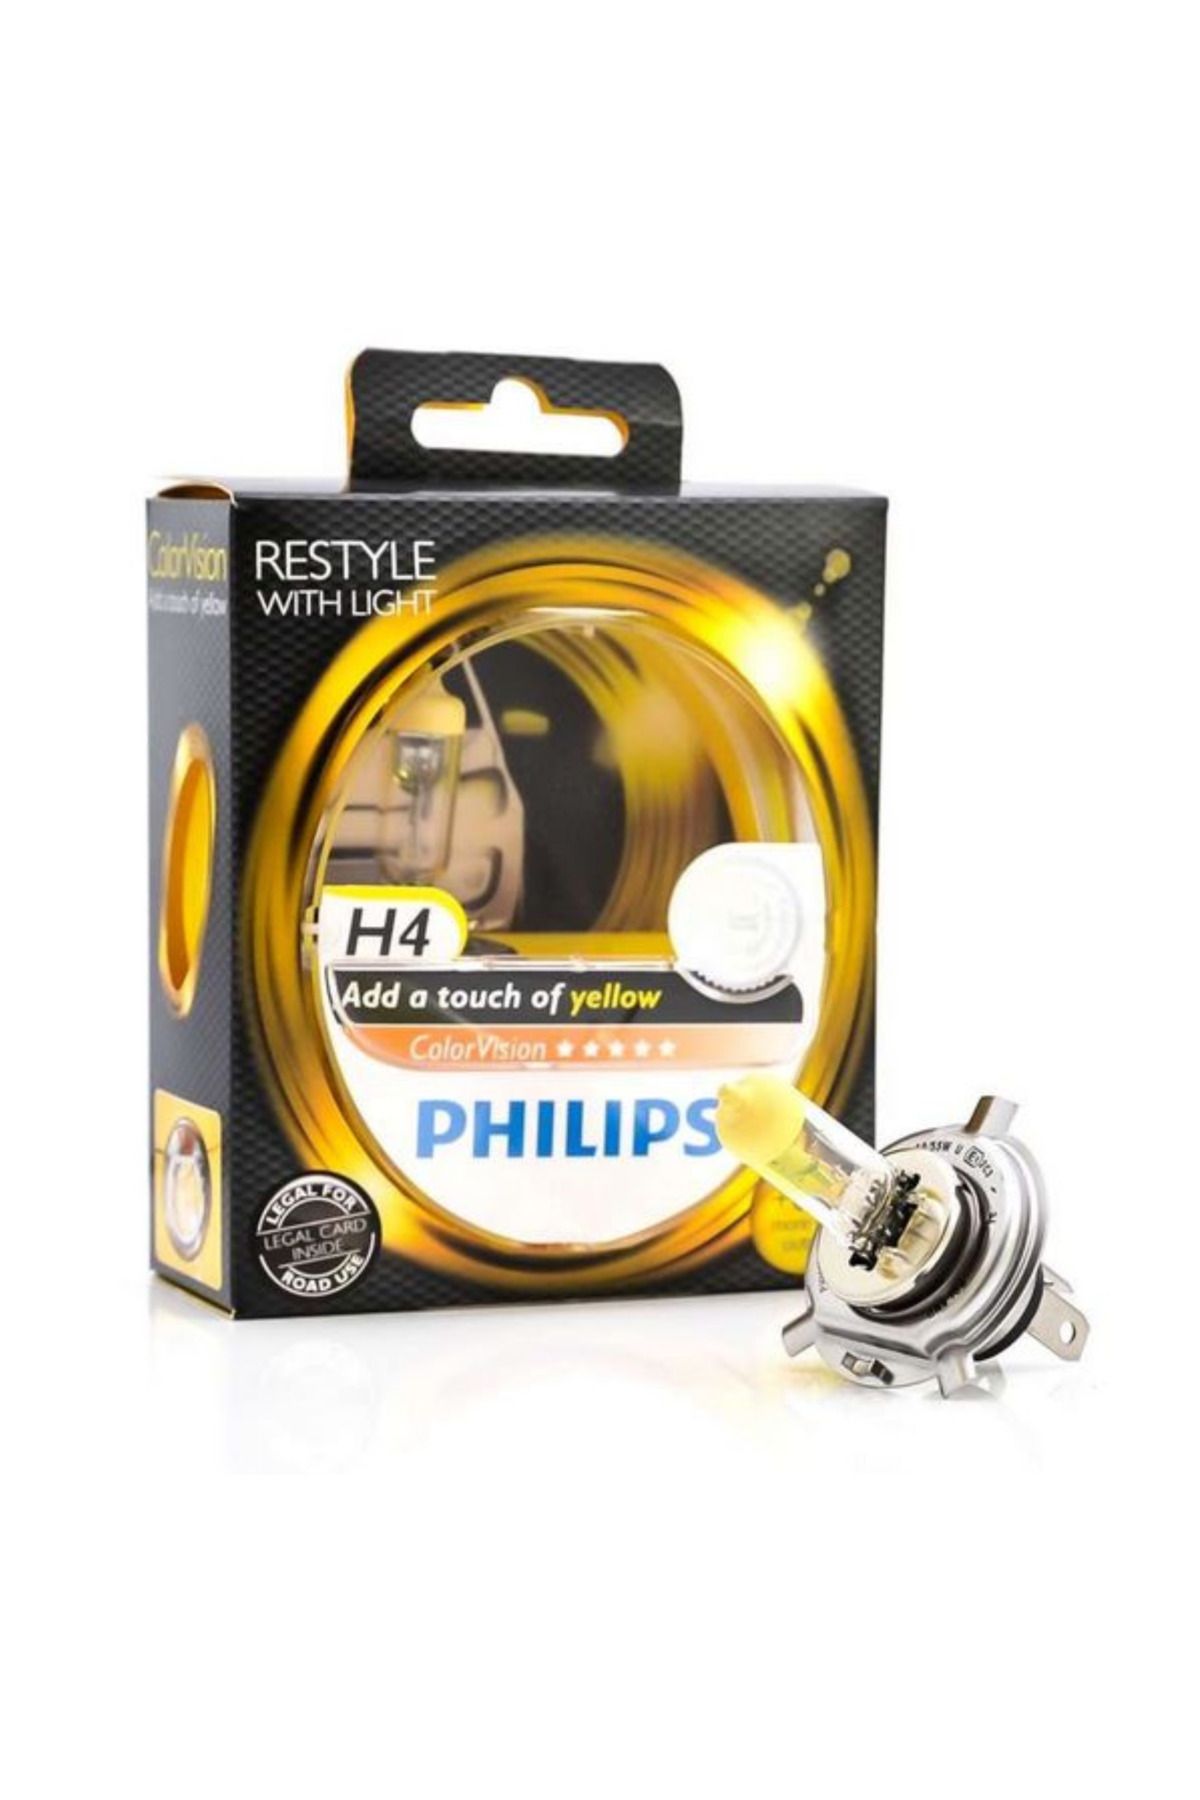 Philips H4 COLOR VİSİON YELLOW